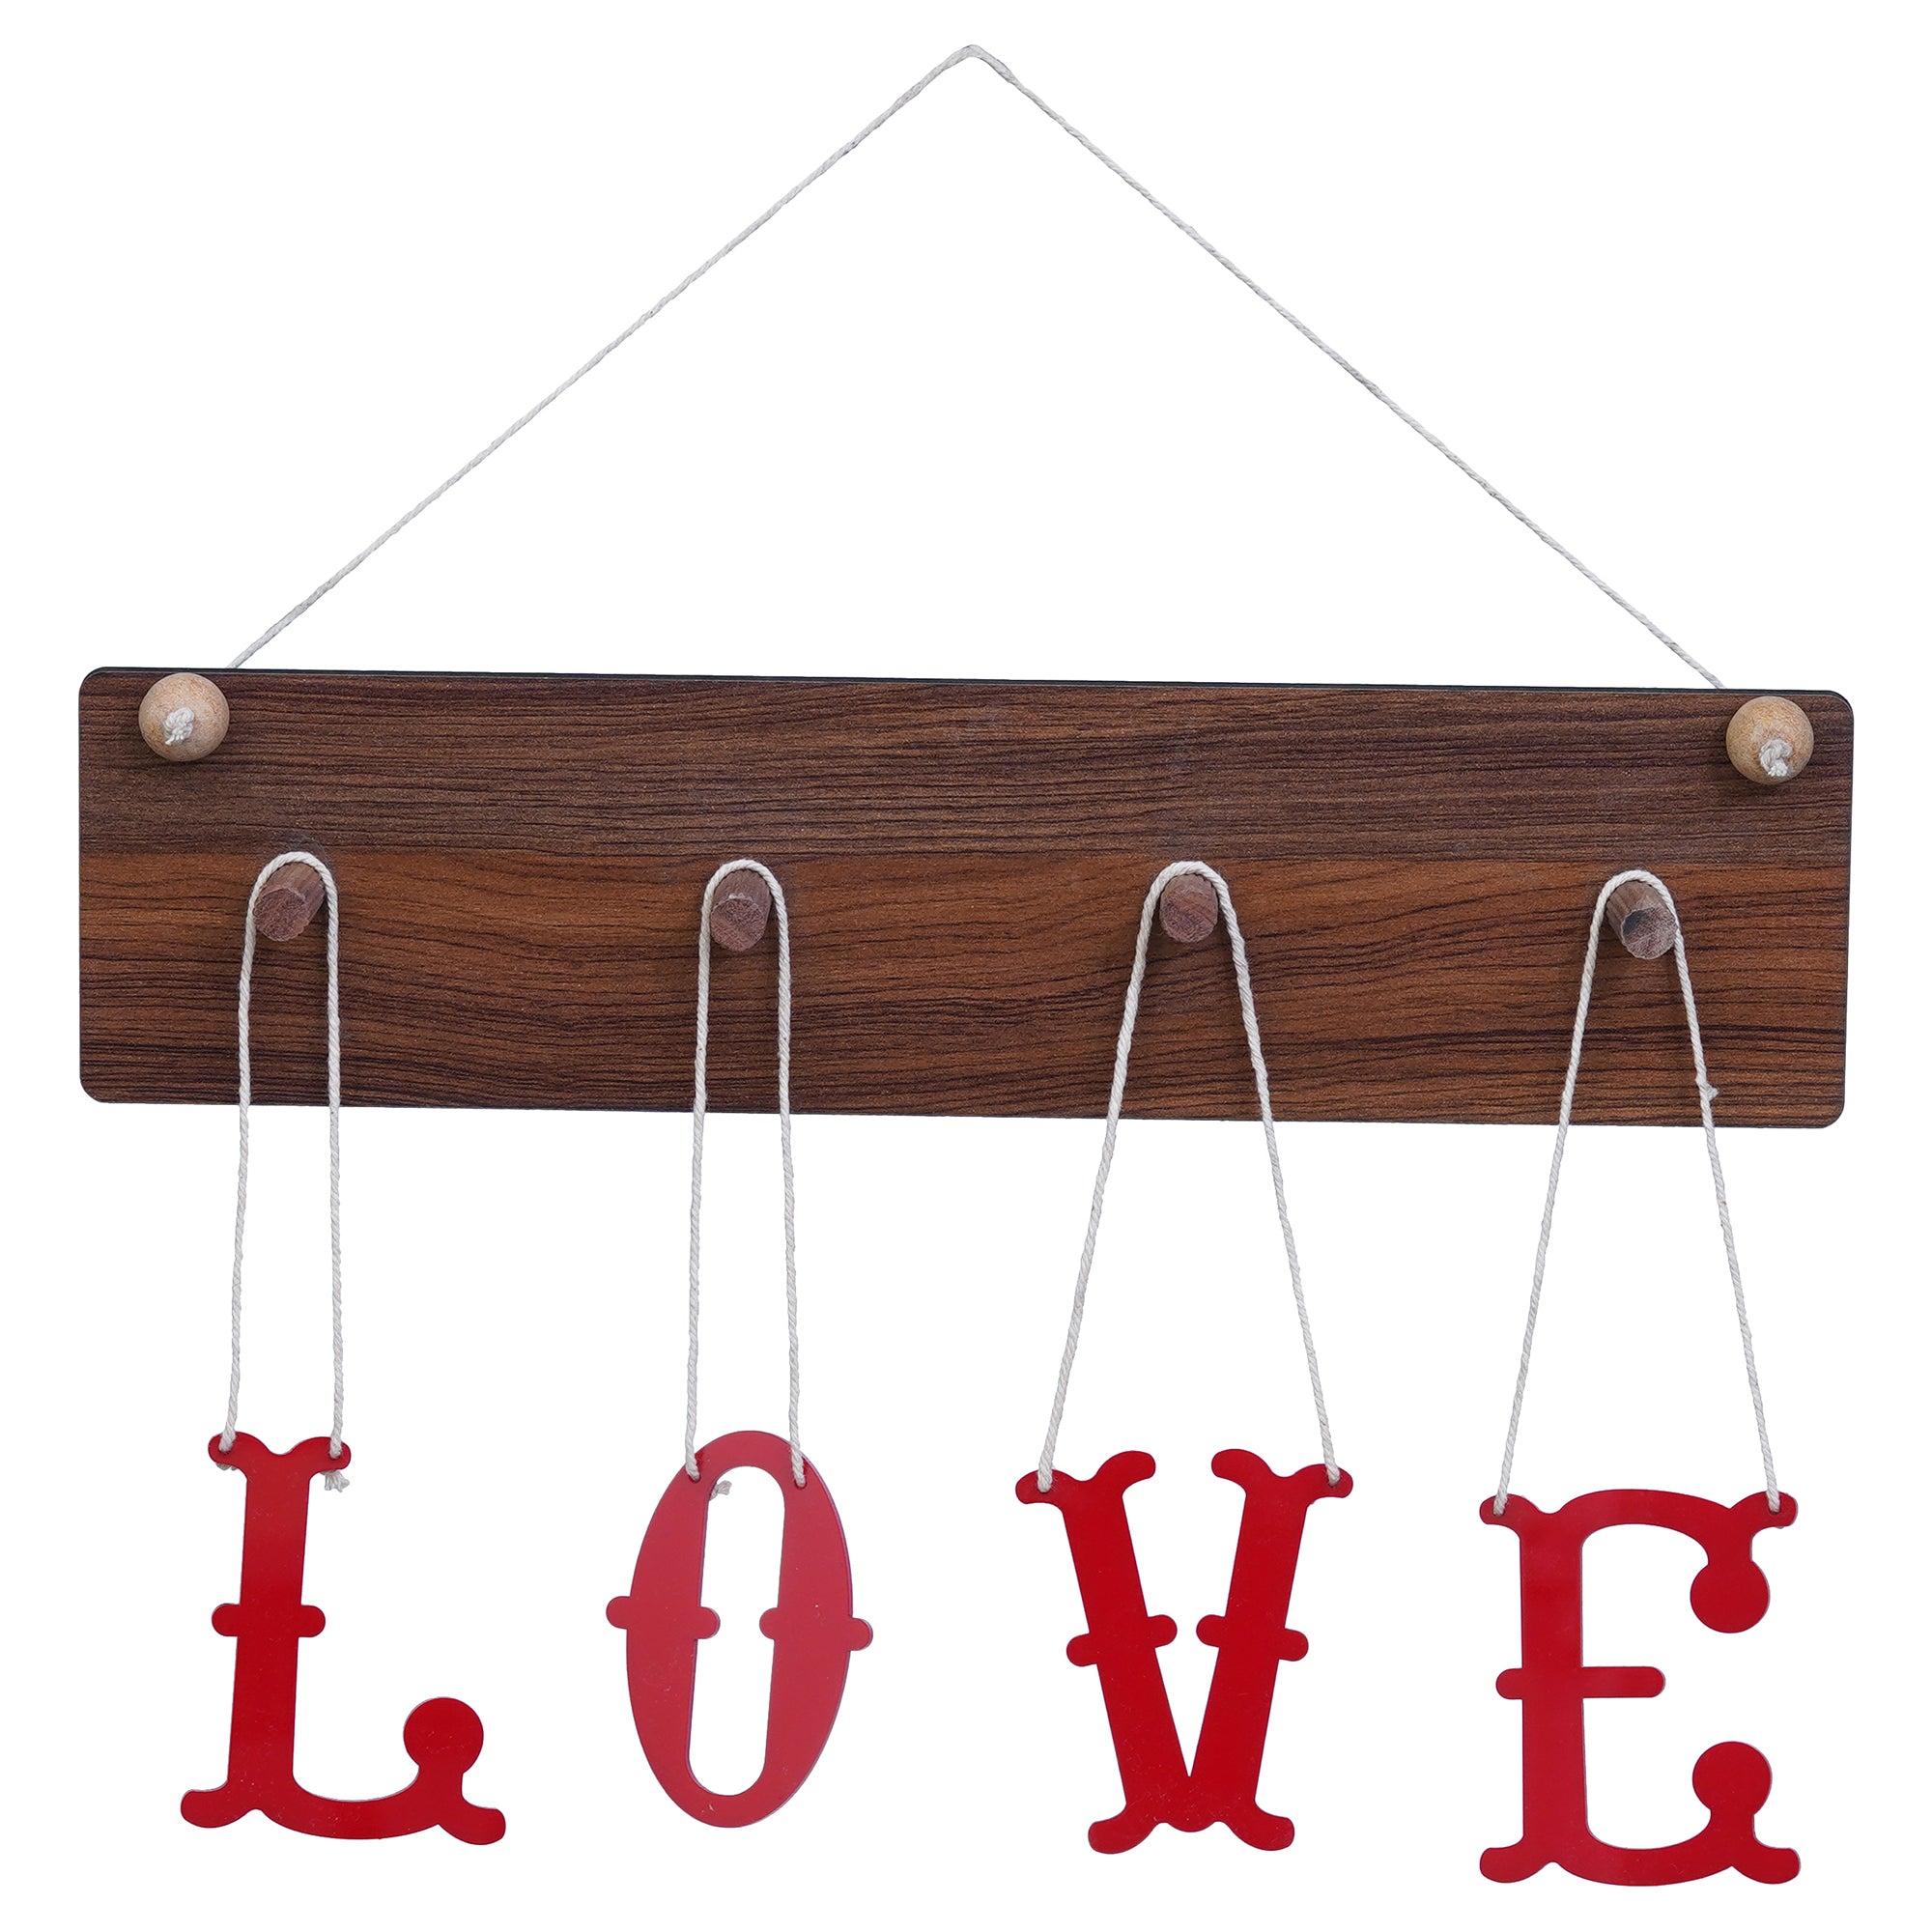 Brown & Red "LOVE" Sign Wooden Wall Hanging Showpiece 2